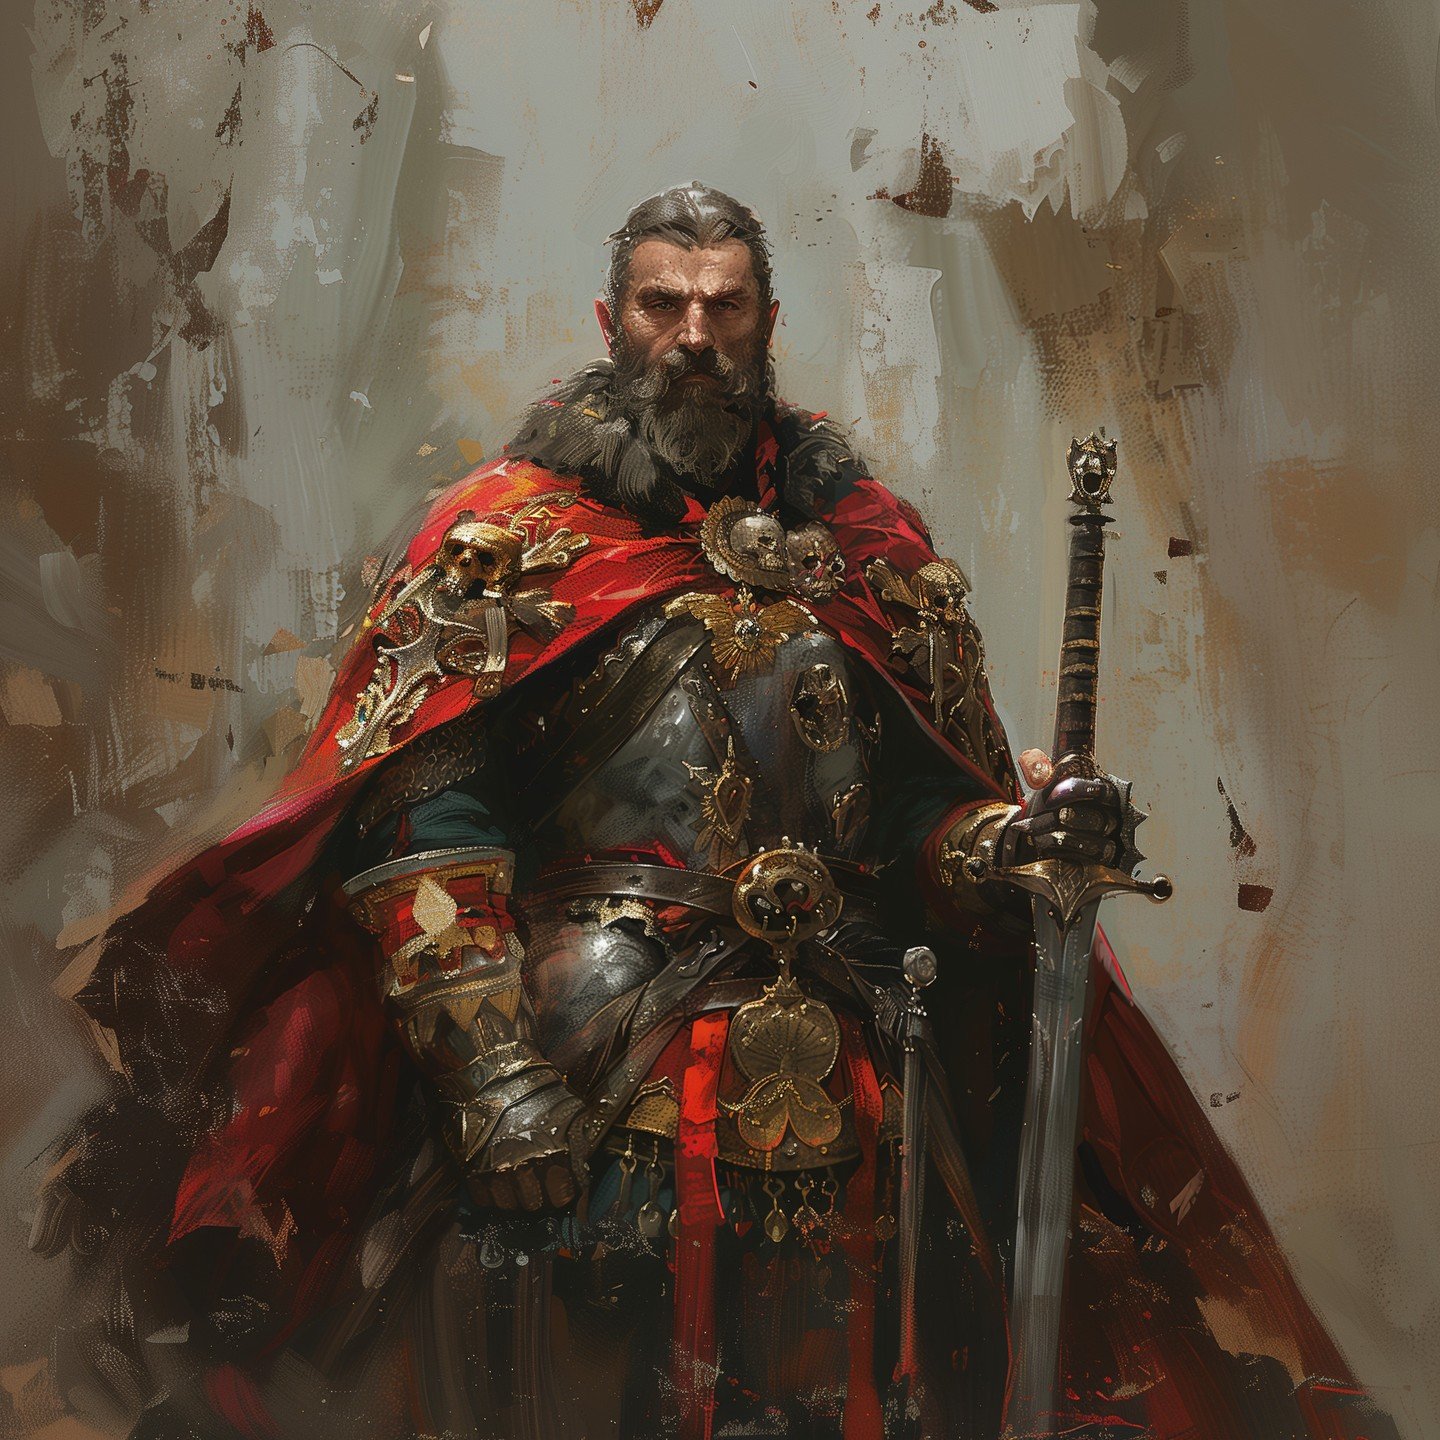 This artwork depicts &Aacute;rp&aacute;d, the leader of the Magyar Confederation from 895 to 907. &Aacute;rp&aacute;d was a pivotal figure in the early history of the Magyars, leading the Hungarian tribes into the Carpathian Basin during the late 9th